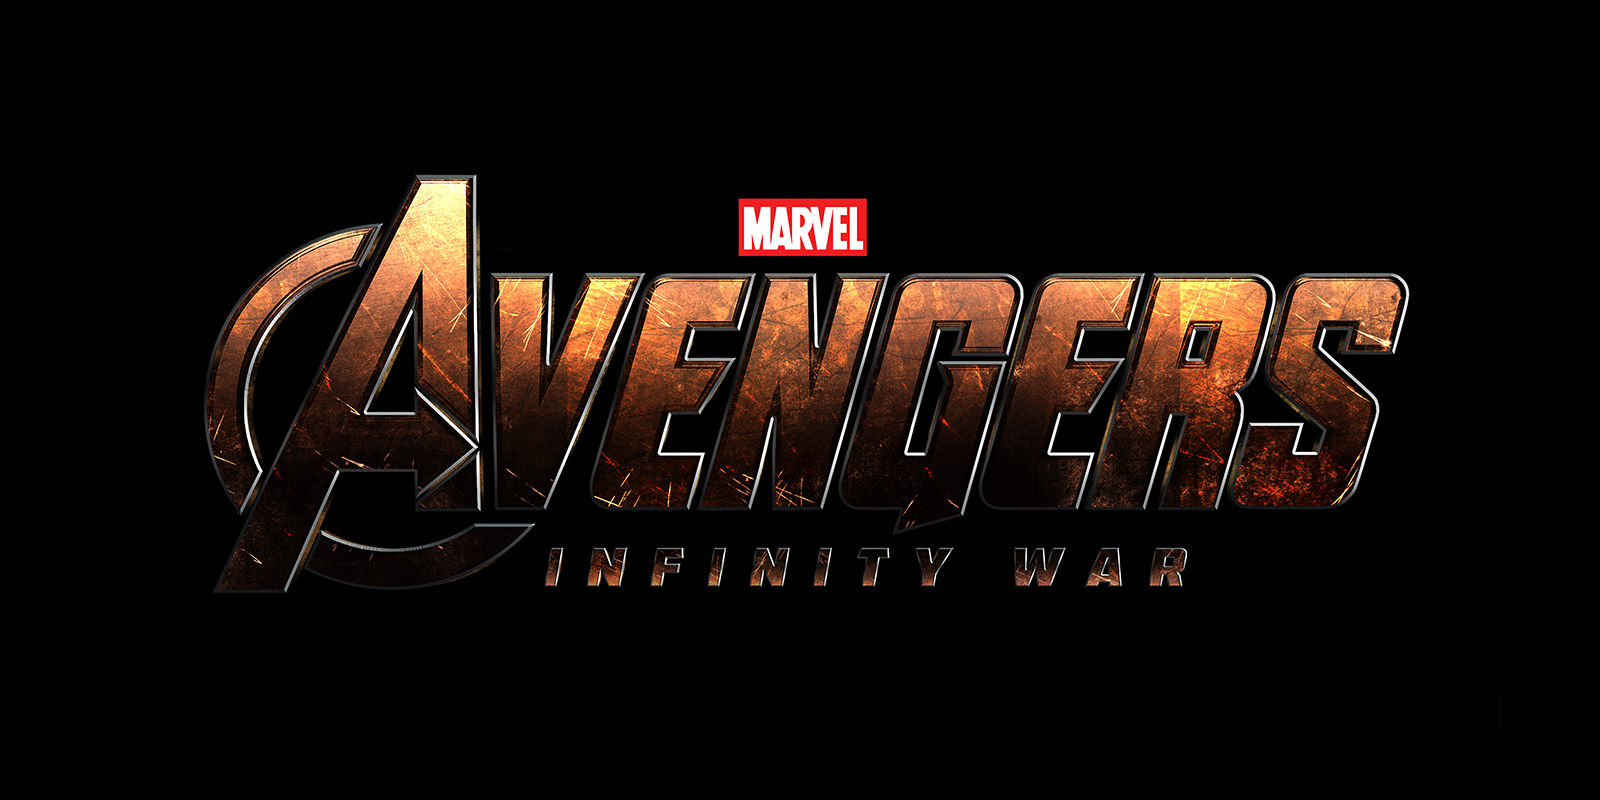 Avengers: Infinity War – a movie review